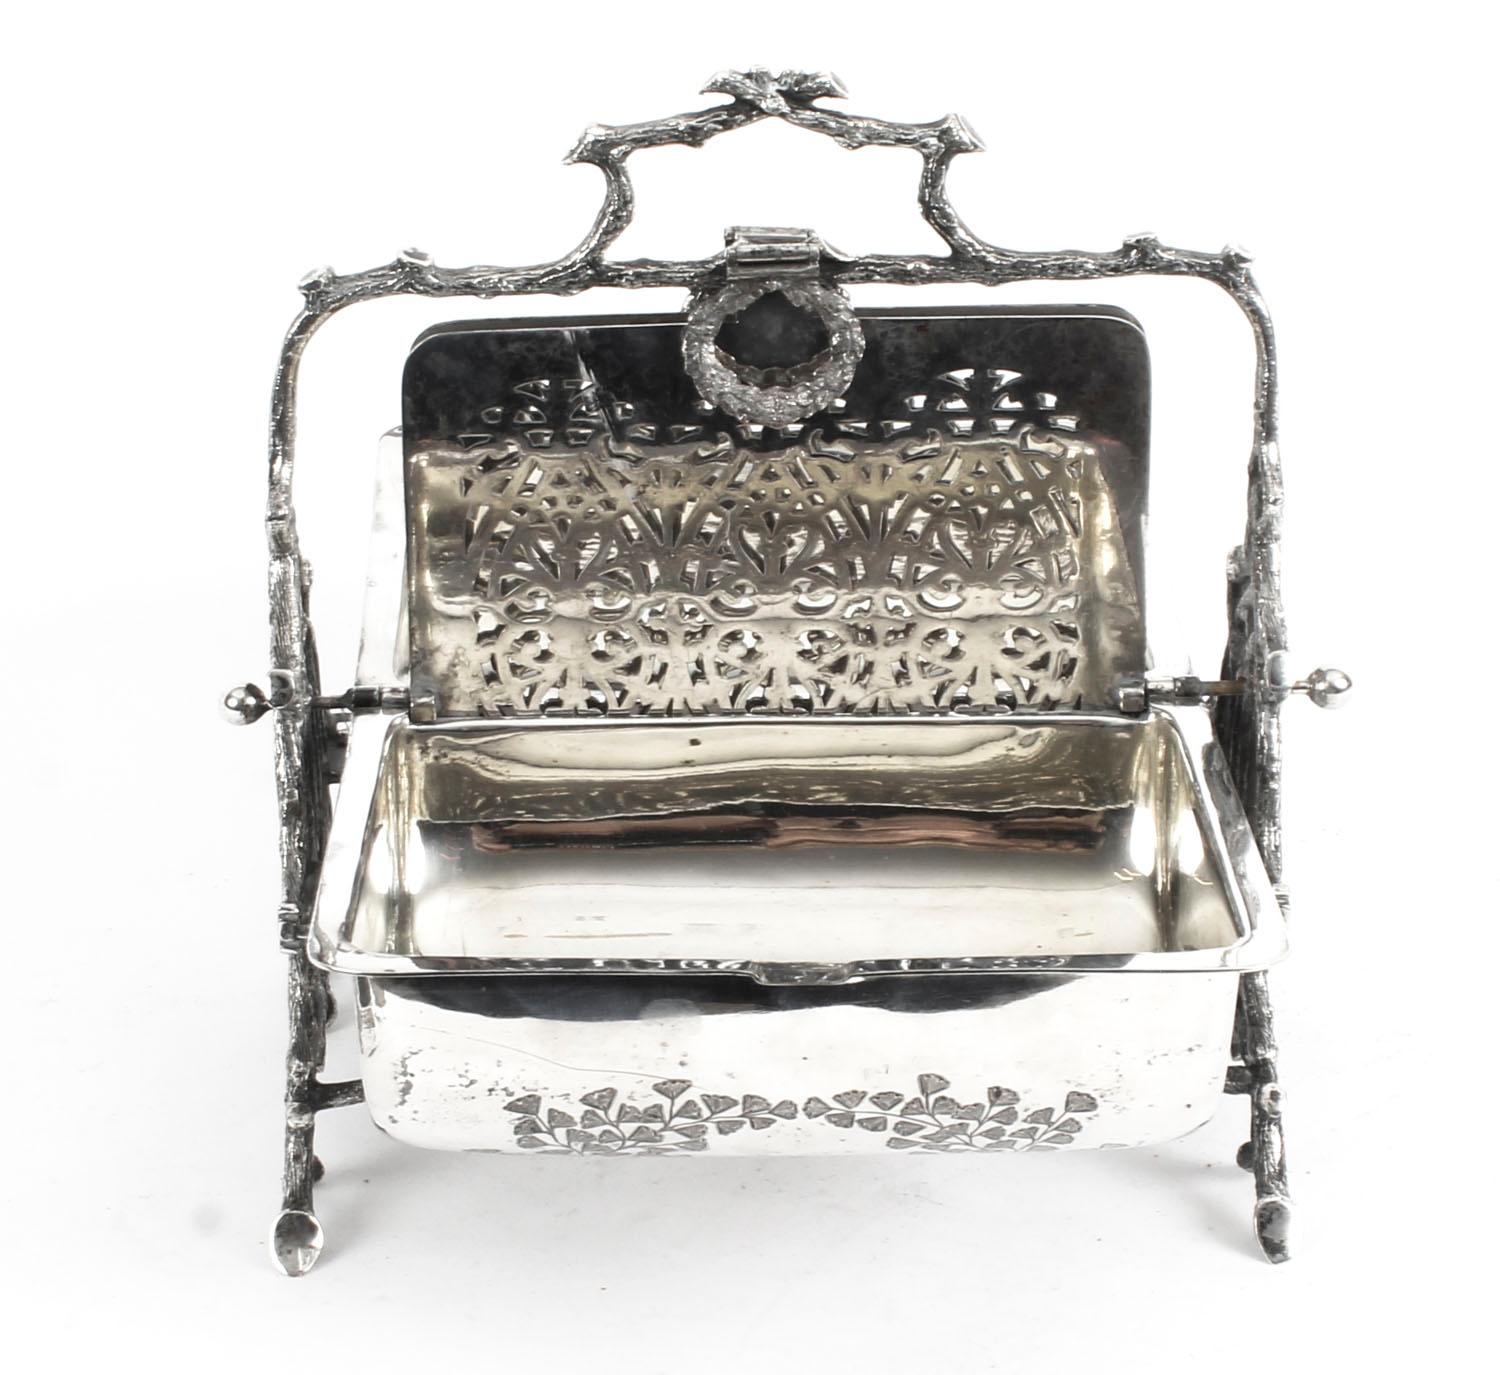 Antique English Silver Plated Folding Sweets Biscuit Box, 19th Century 6